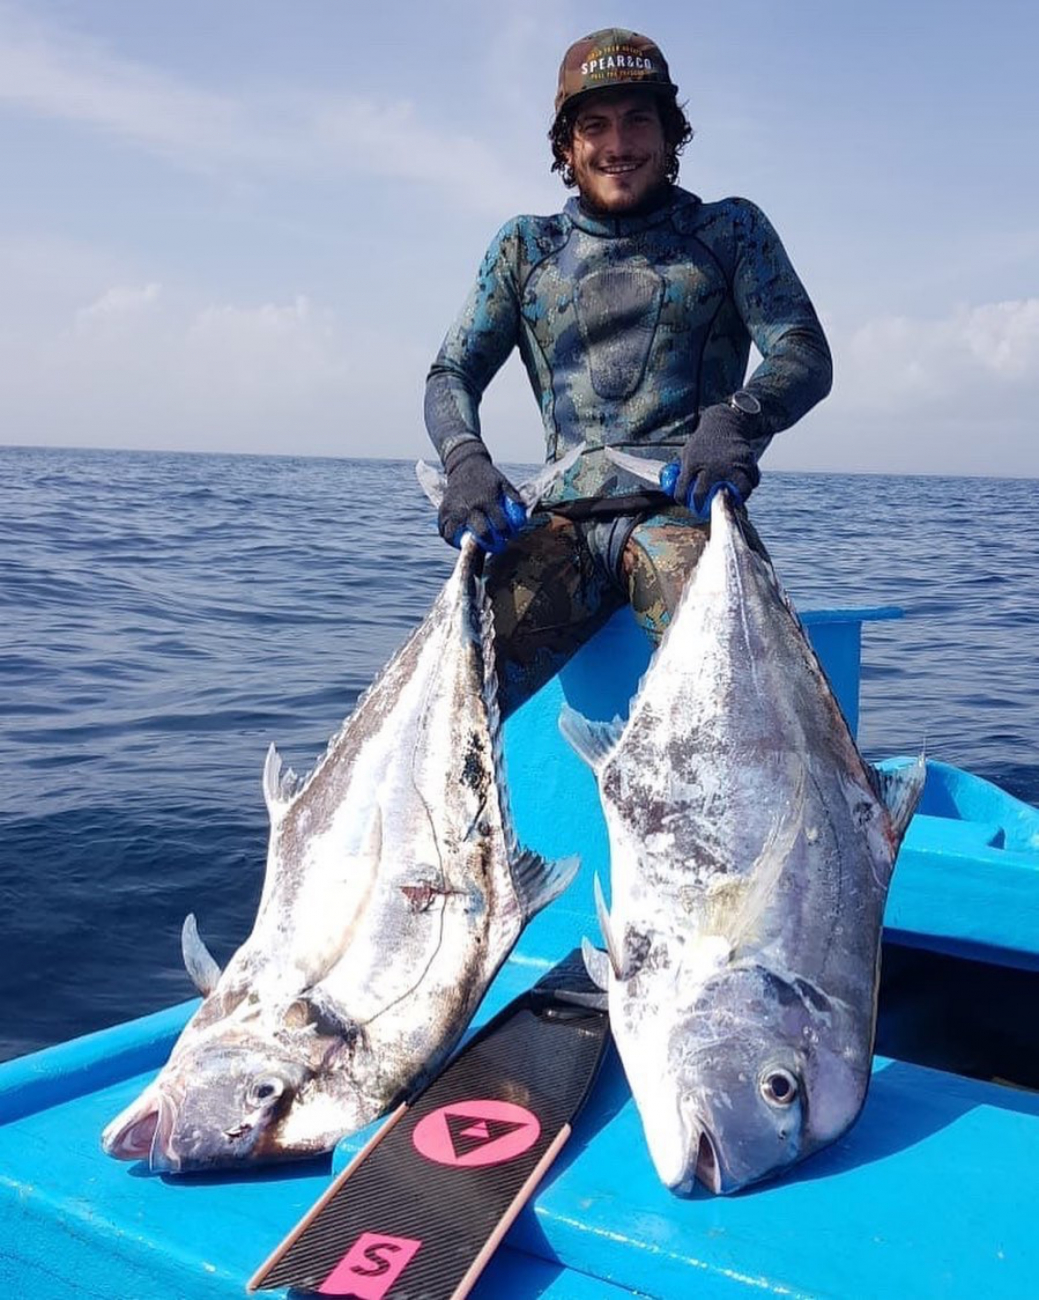 spearfishing at the gulf of mexico using alchemy s30 carbon fins